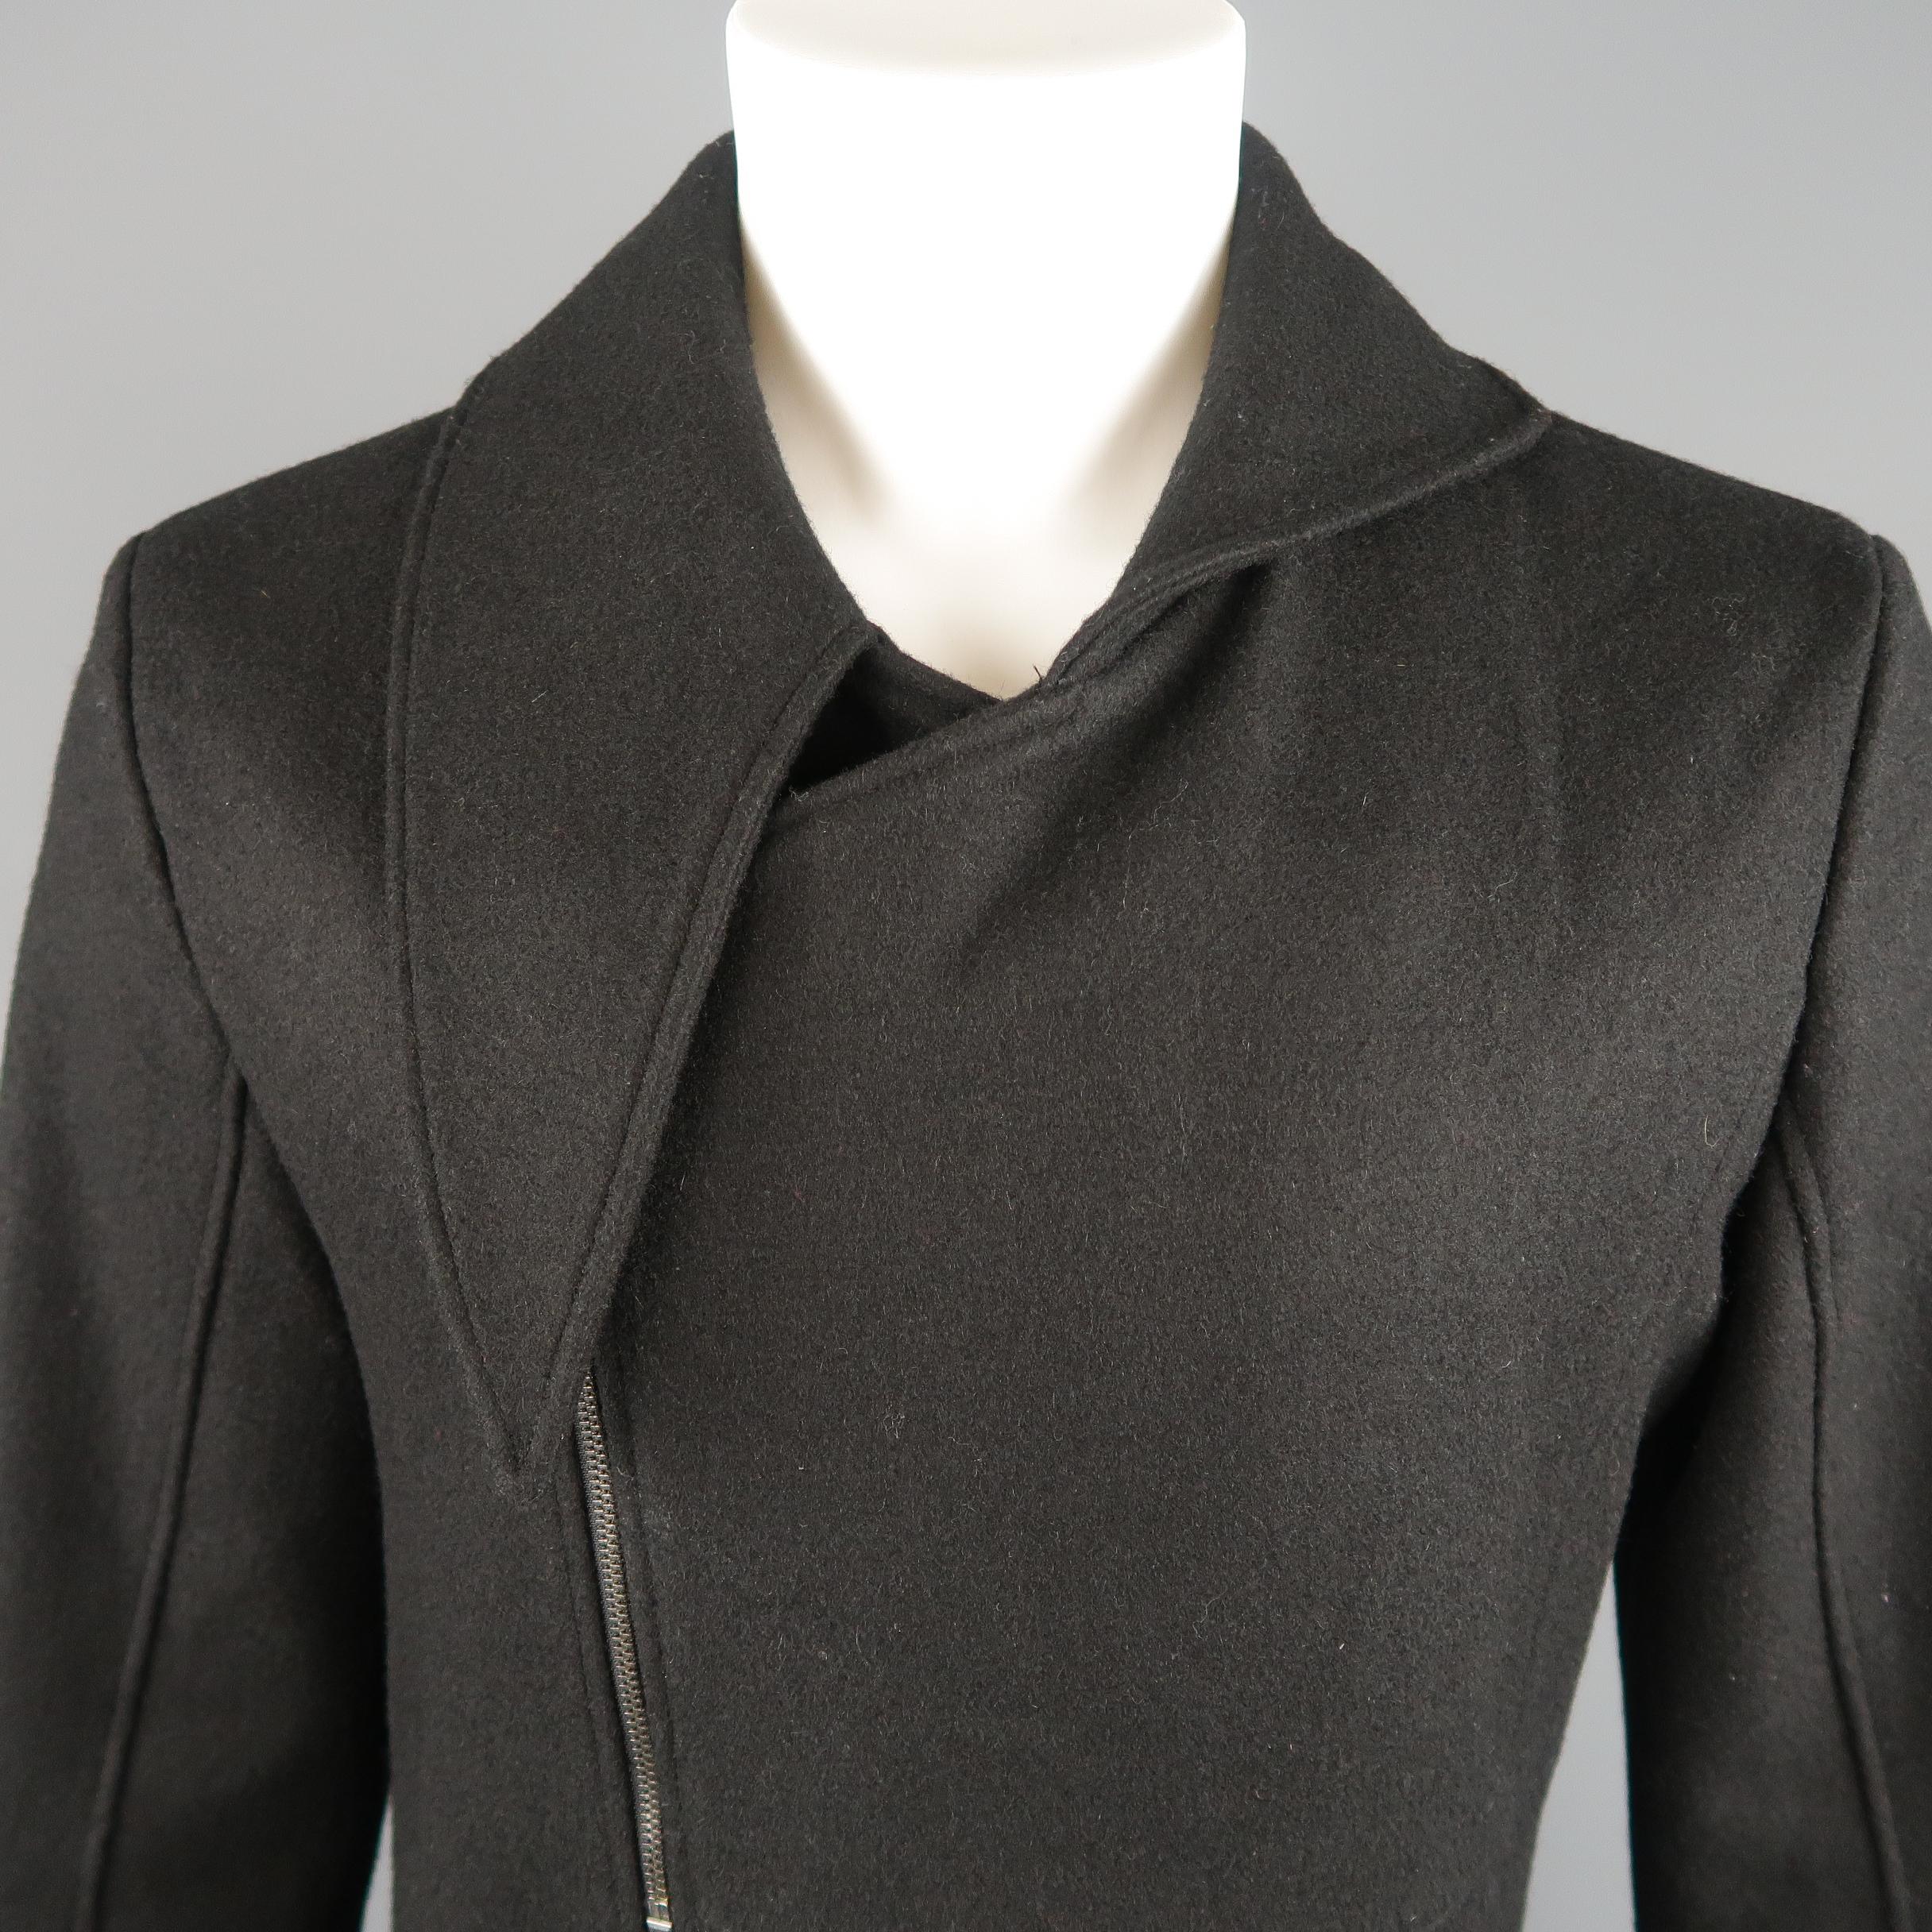 D. GNAK by KANG D. jacket comes in black wool blend with a long asymmetrical pointed half collar, zip and snap double breasted closure, bi level hem sleeves, and asymmetrical seams.
 
Excellent Pre-Owned Condition.
Marked:  IT 50
 
Measurements:
